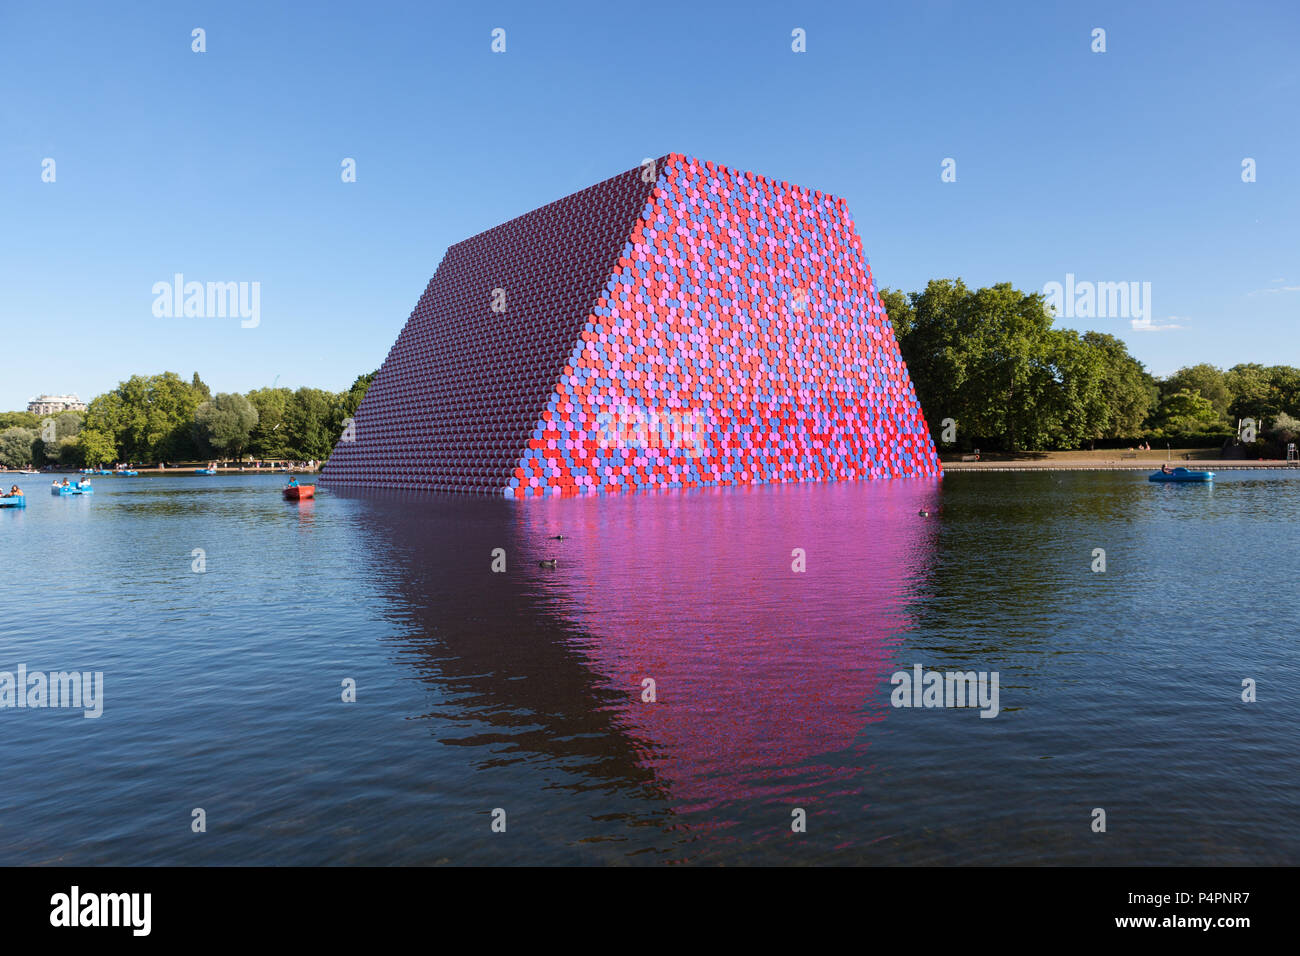 London Mastaba on Serpentine Lake in Hyde Park created by Christo. Stock Photo